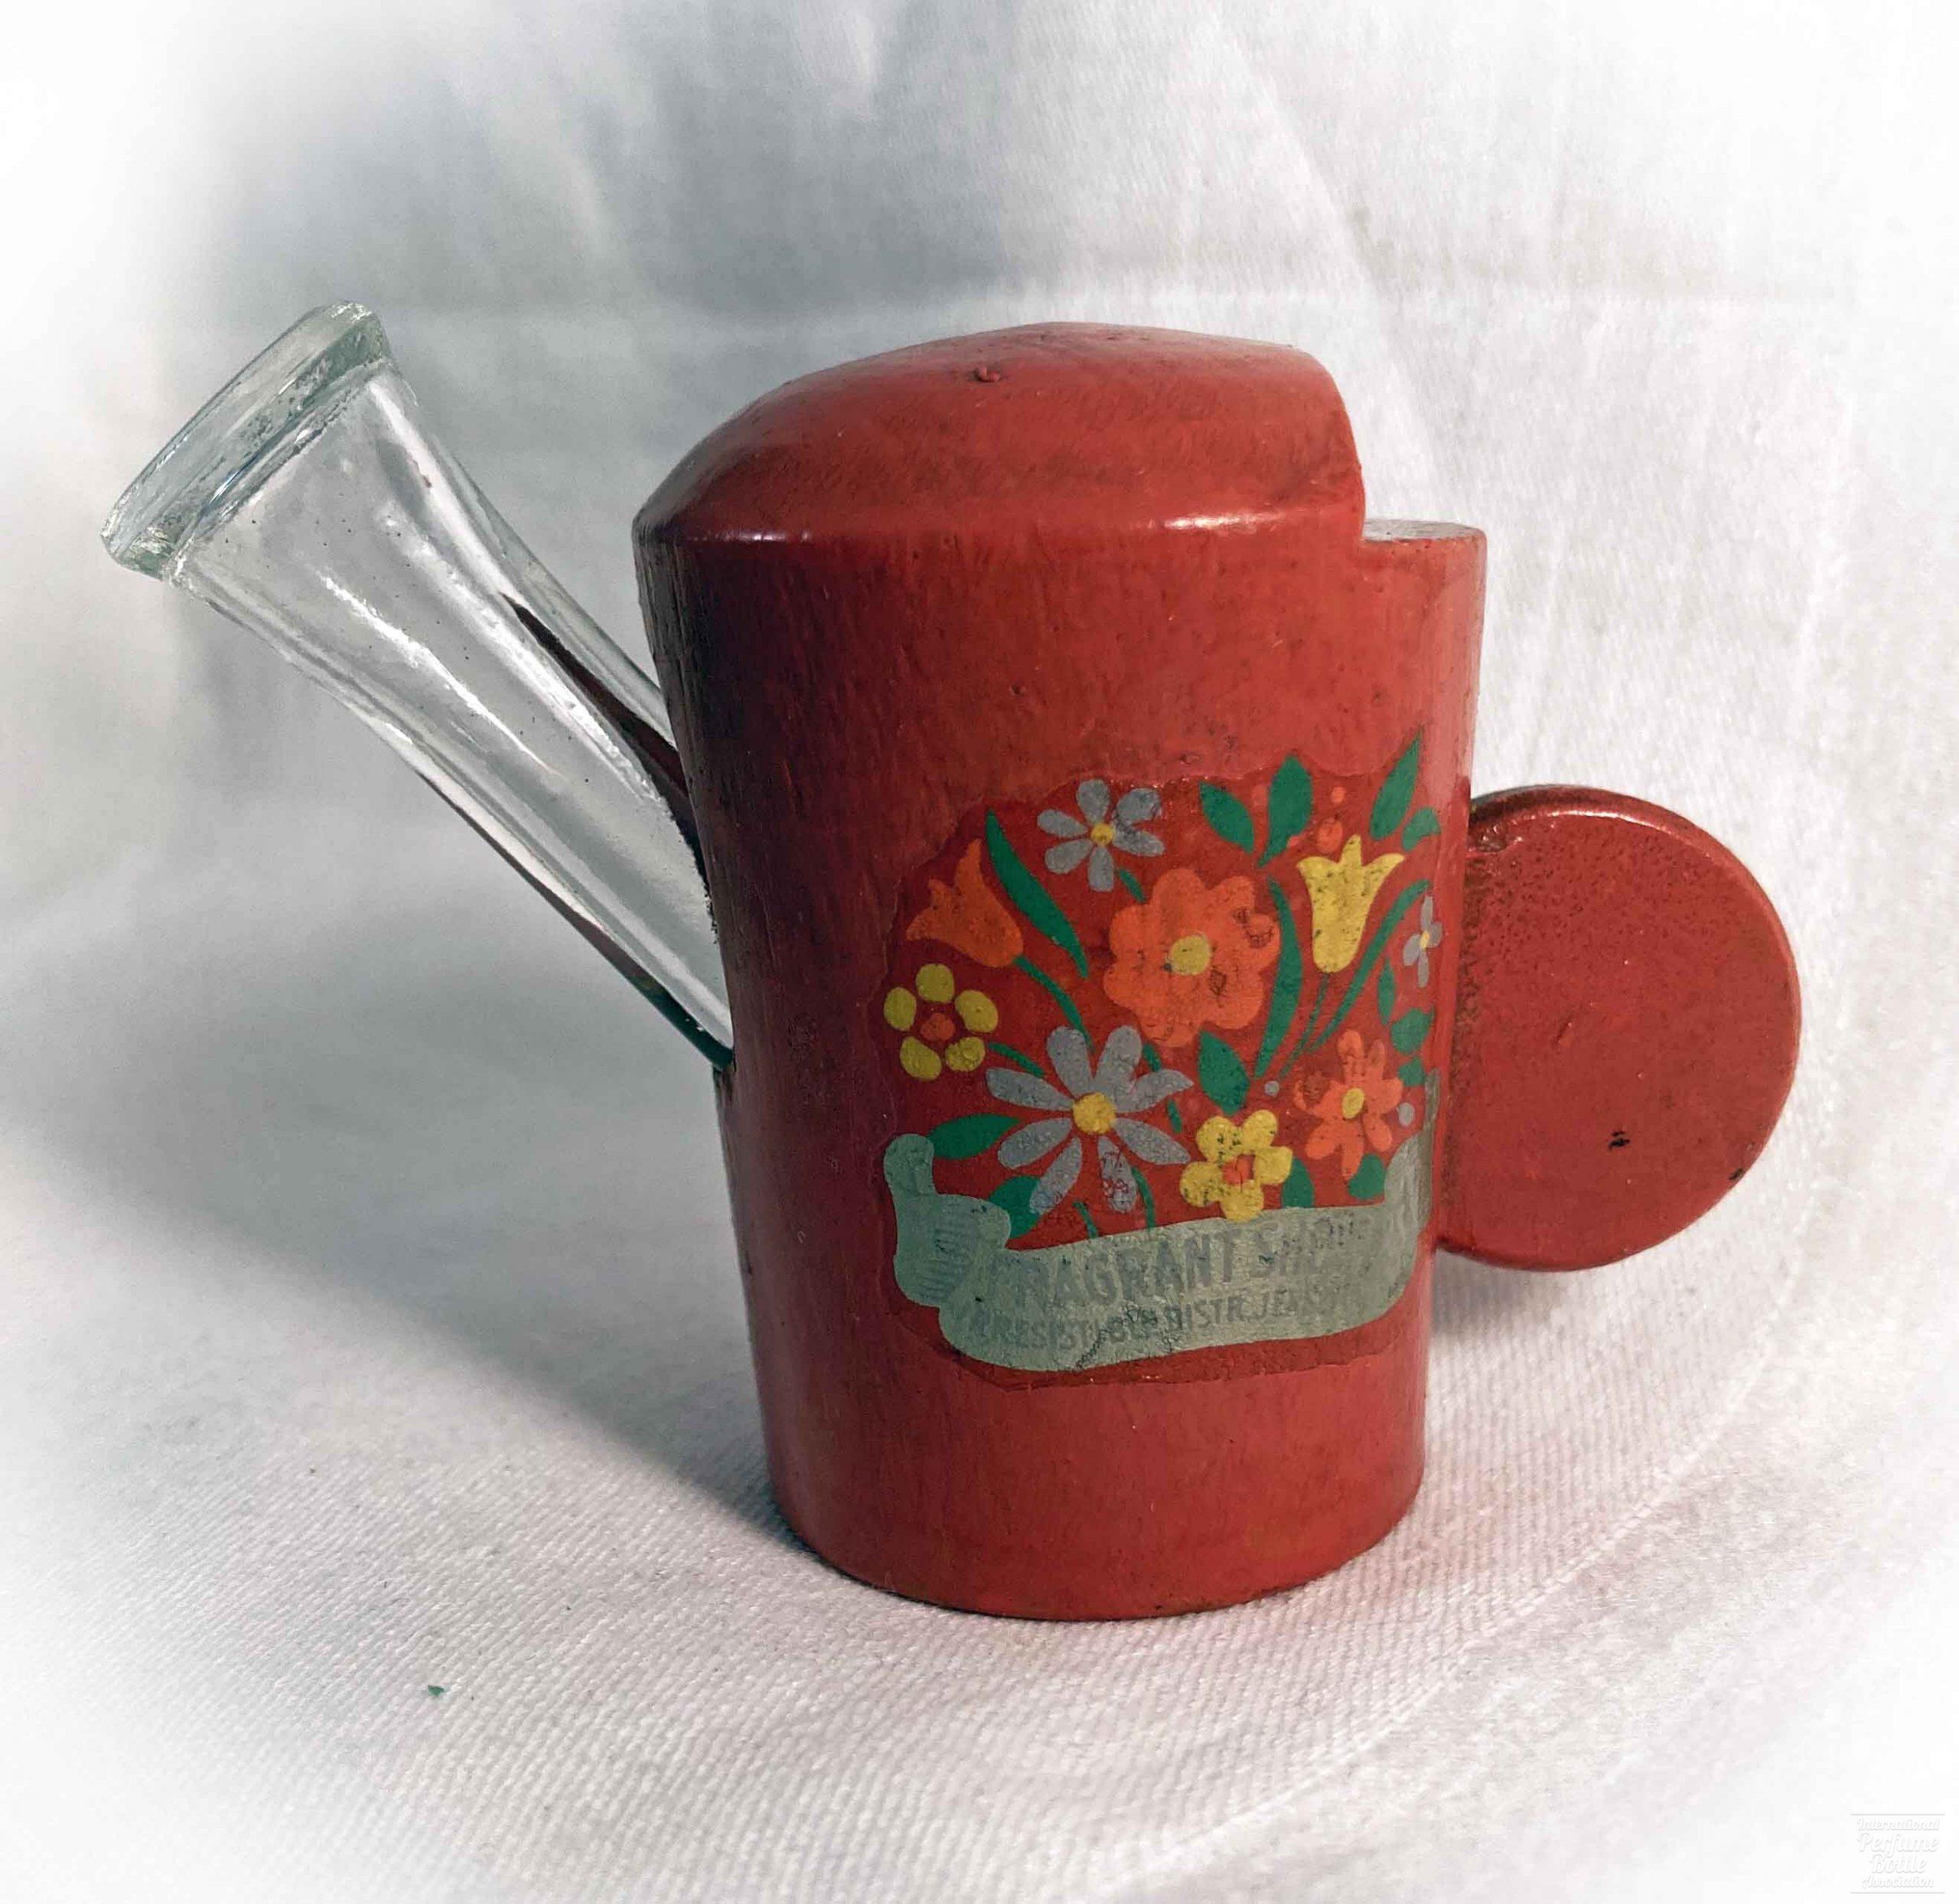 "Fragrant Showers" Watering Can by Irresistible